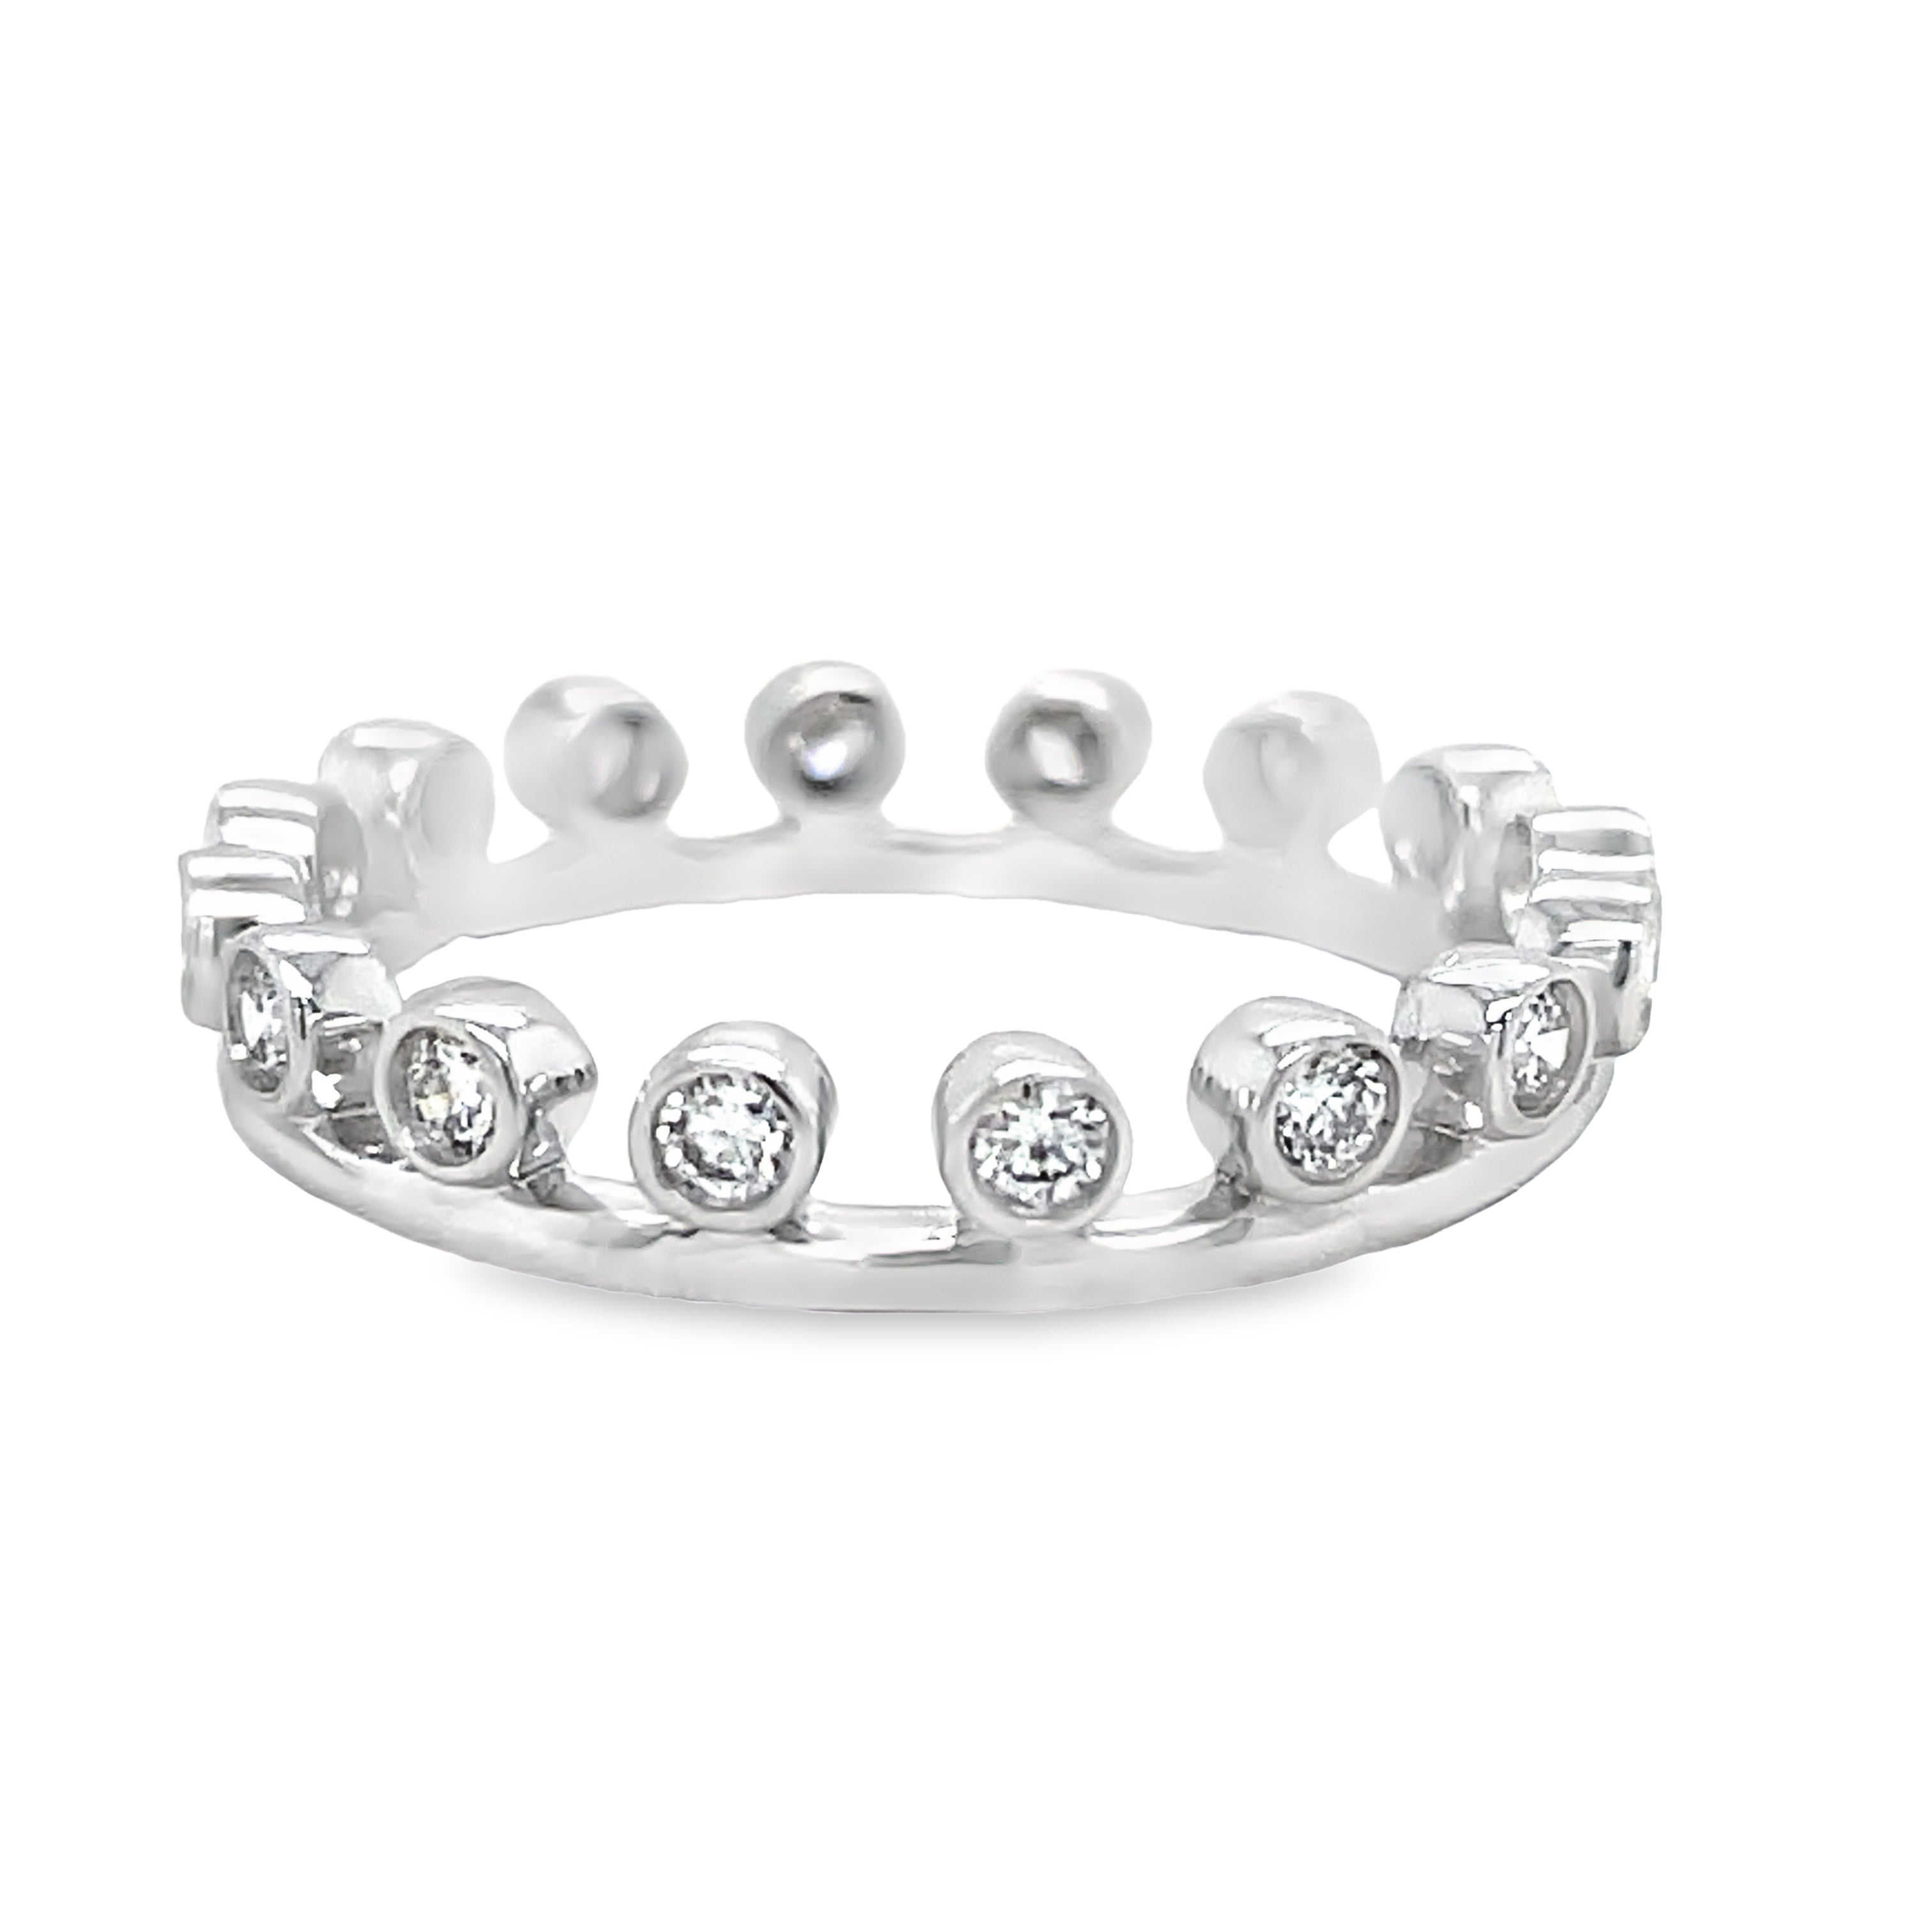 Adorn yourself in shimmer and sparkle with this stunning diamond accent crown eternity ring! Featuring 0.37 carats of bezel-set diamonds in a 14k&nbsp;white gold mounting, this gorgeous piece is size 6 and easy to stack with other rings.